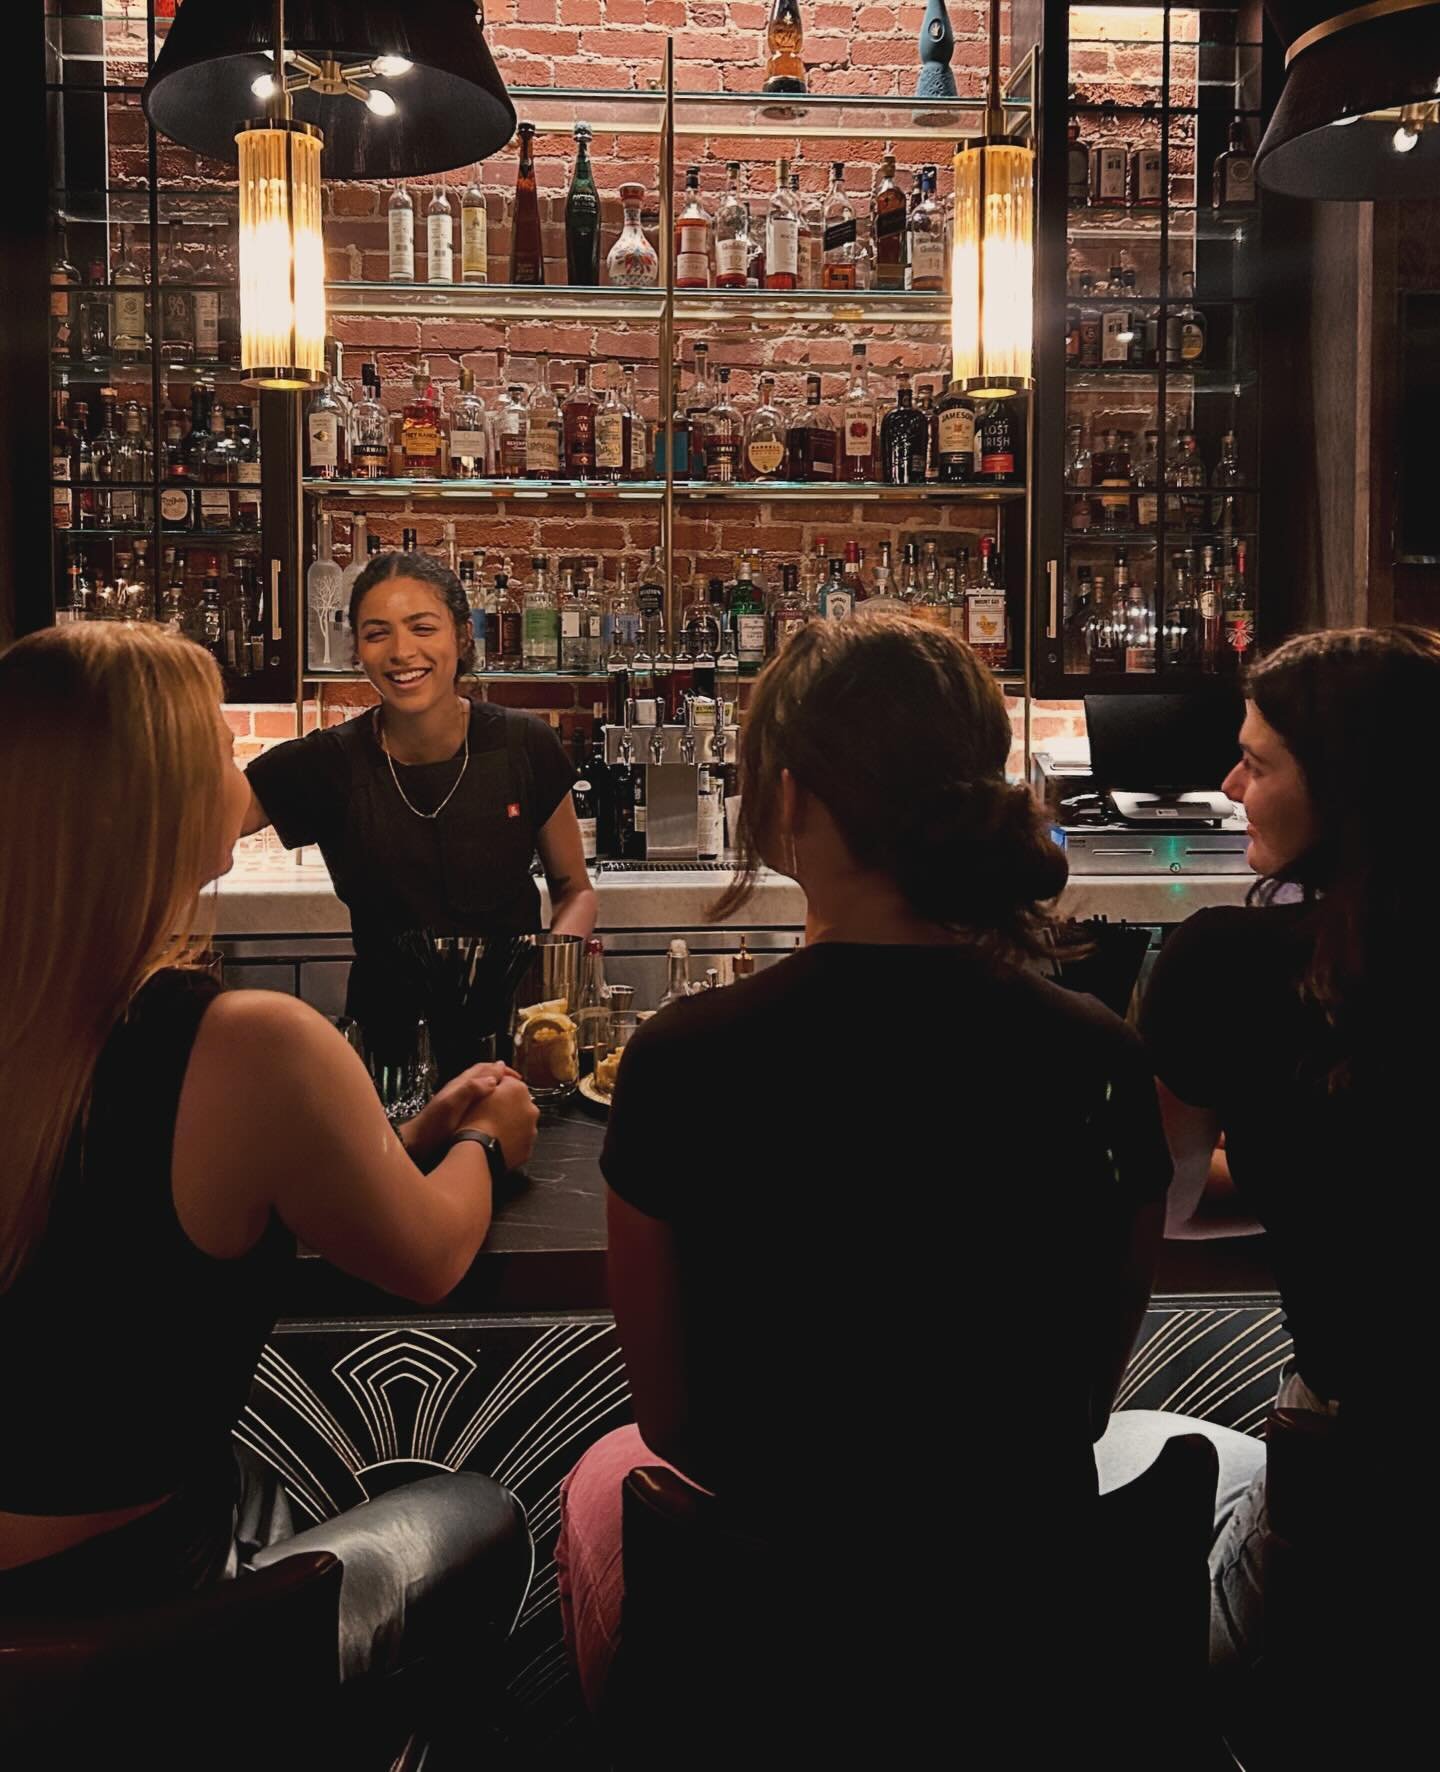 Girl&rsquo;s night out @historicstarlounge ✨🍸

#historicstarlounge #sacramento #girlsnight #girlsnightout #cocktails #girlsnightout #midtownsacramento #sacramentoevents